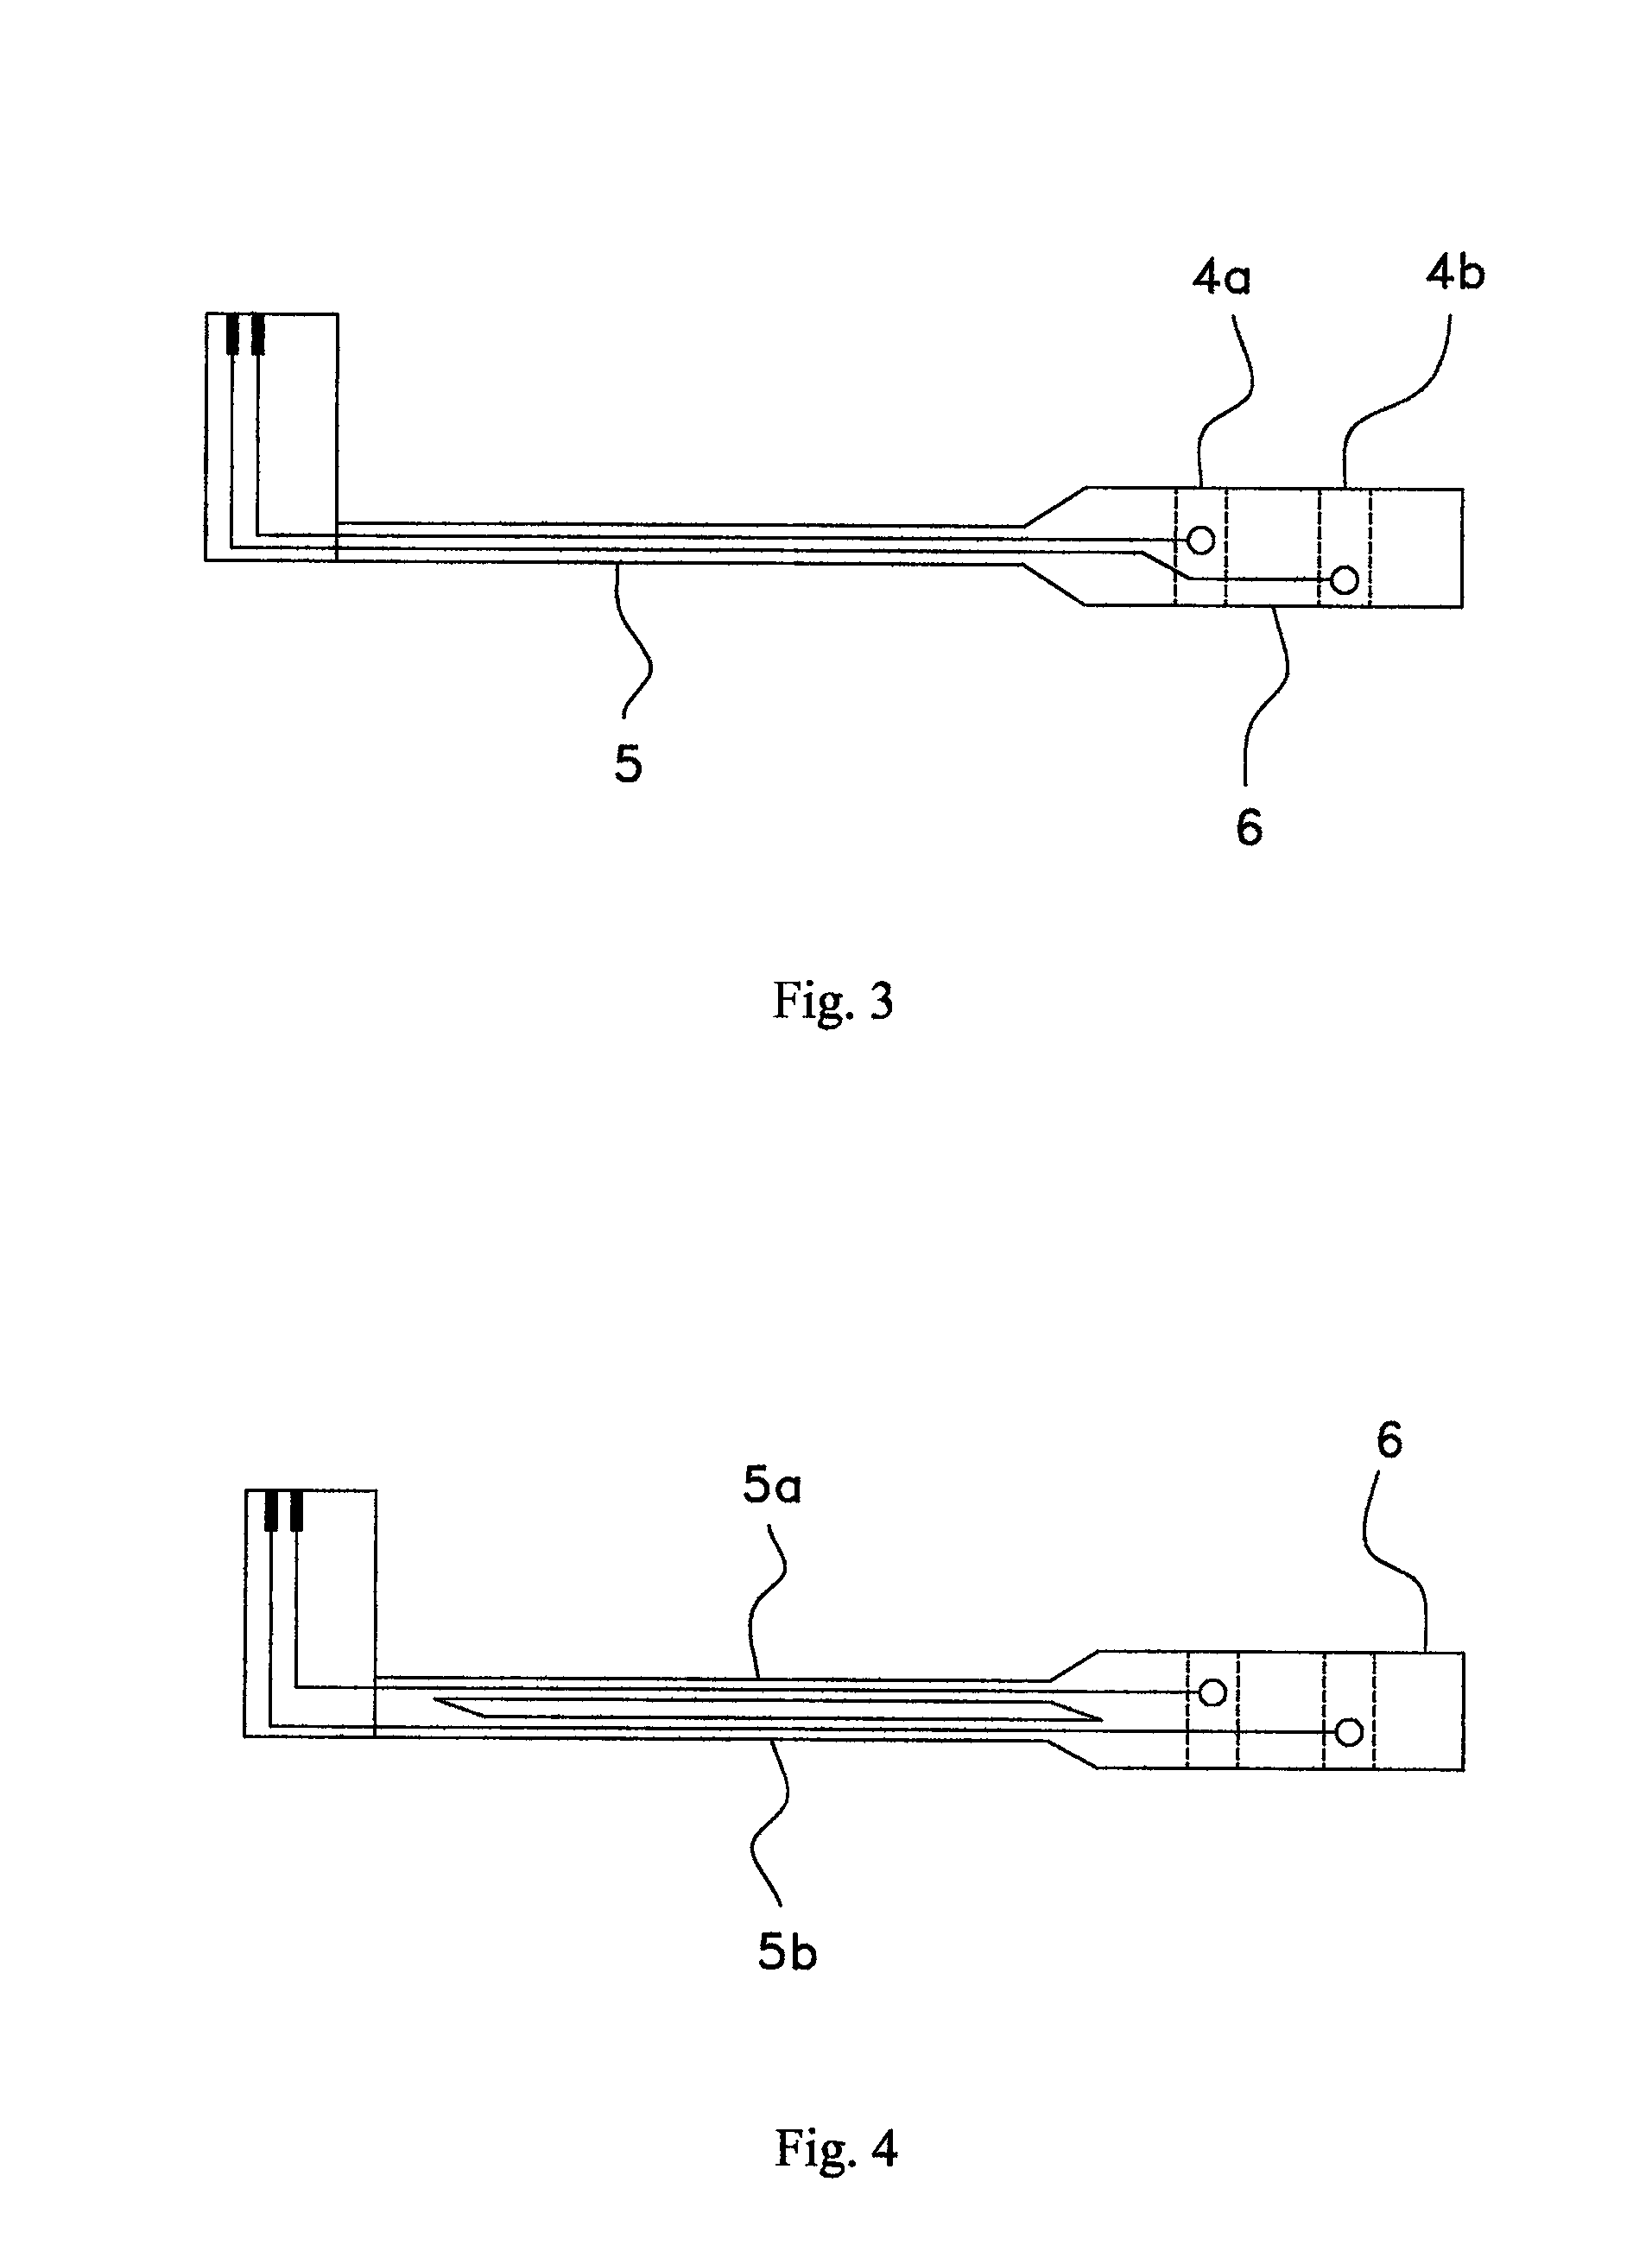 Flexible Conductor Carrier for Catheter and Catheter Fitted with a Conductor Carrier